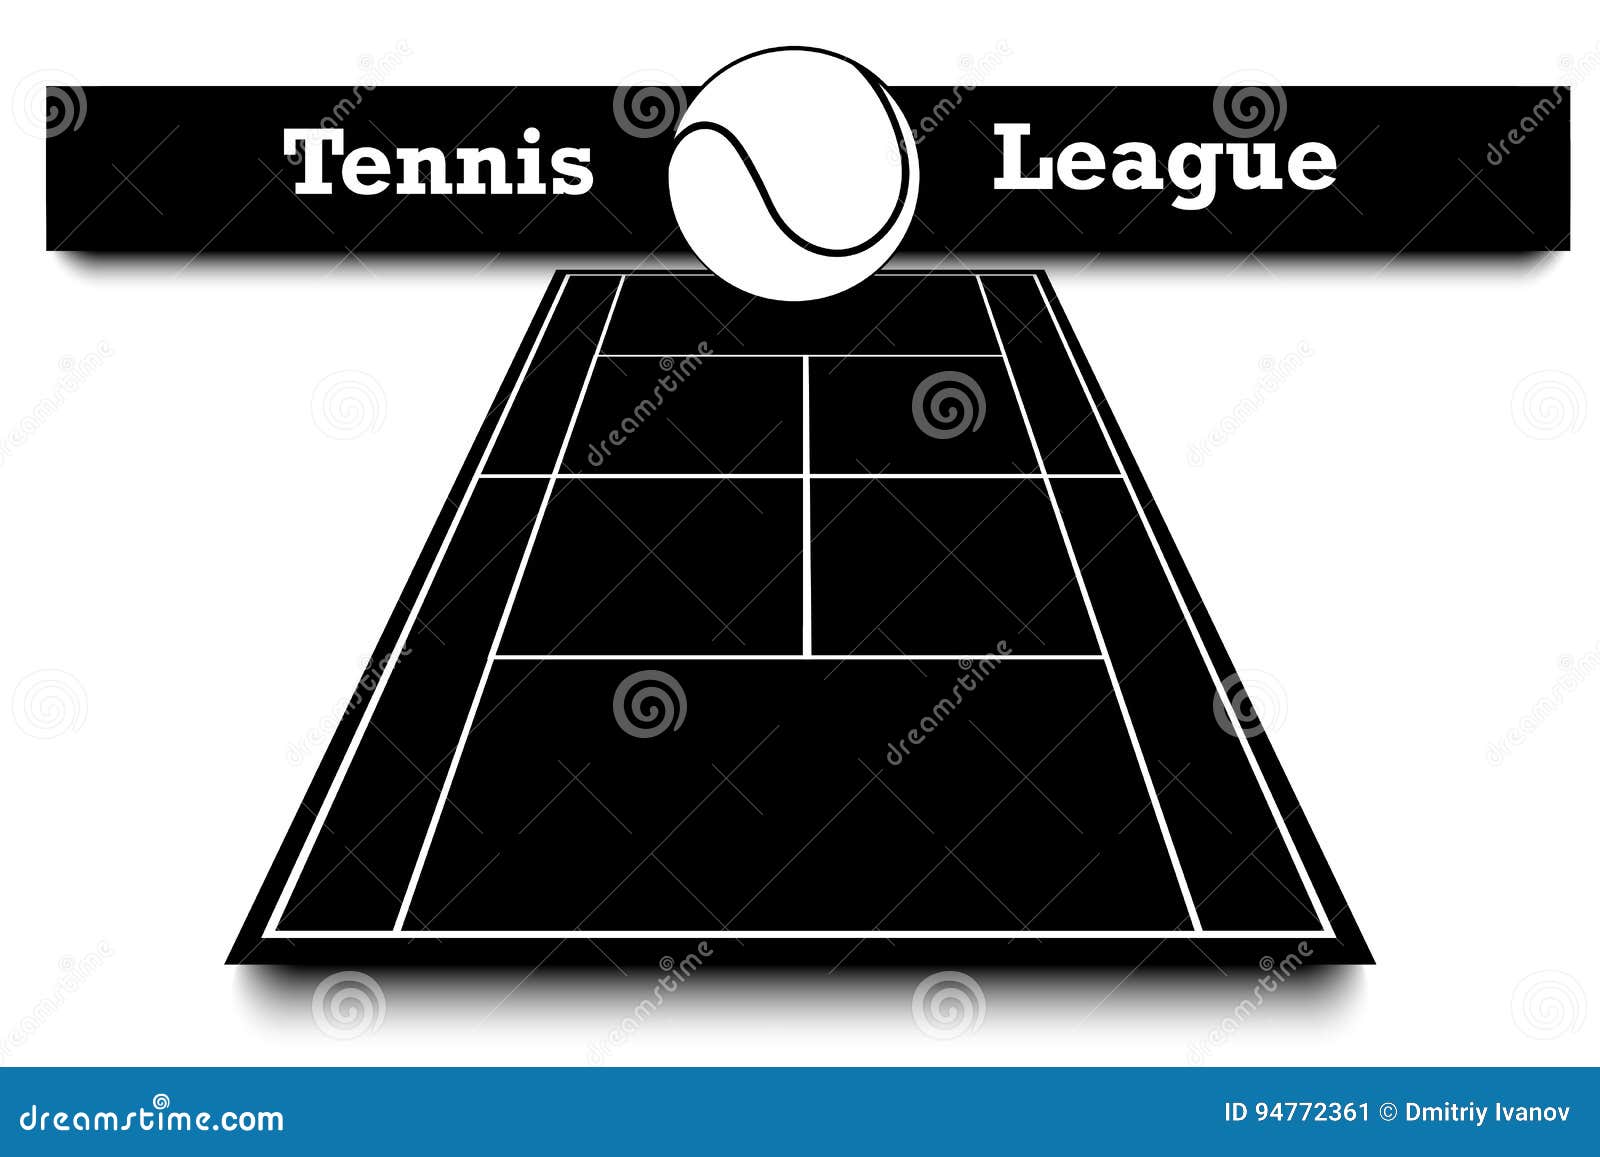 Score of the tennis match stock vector